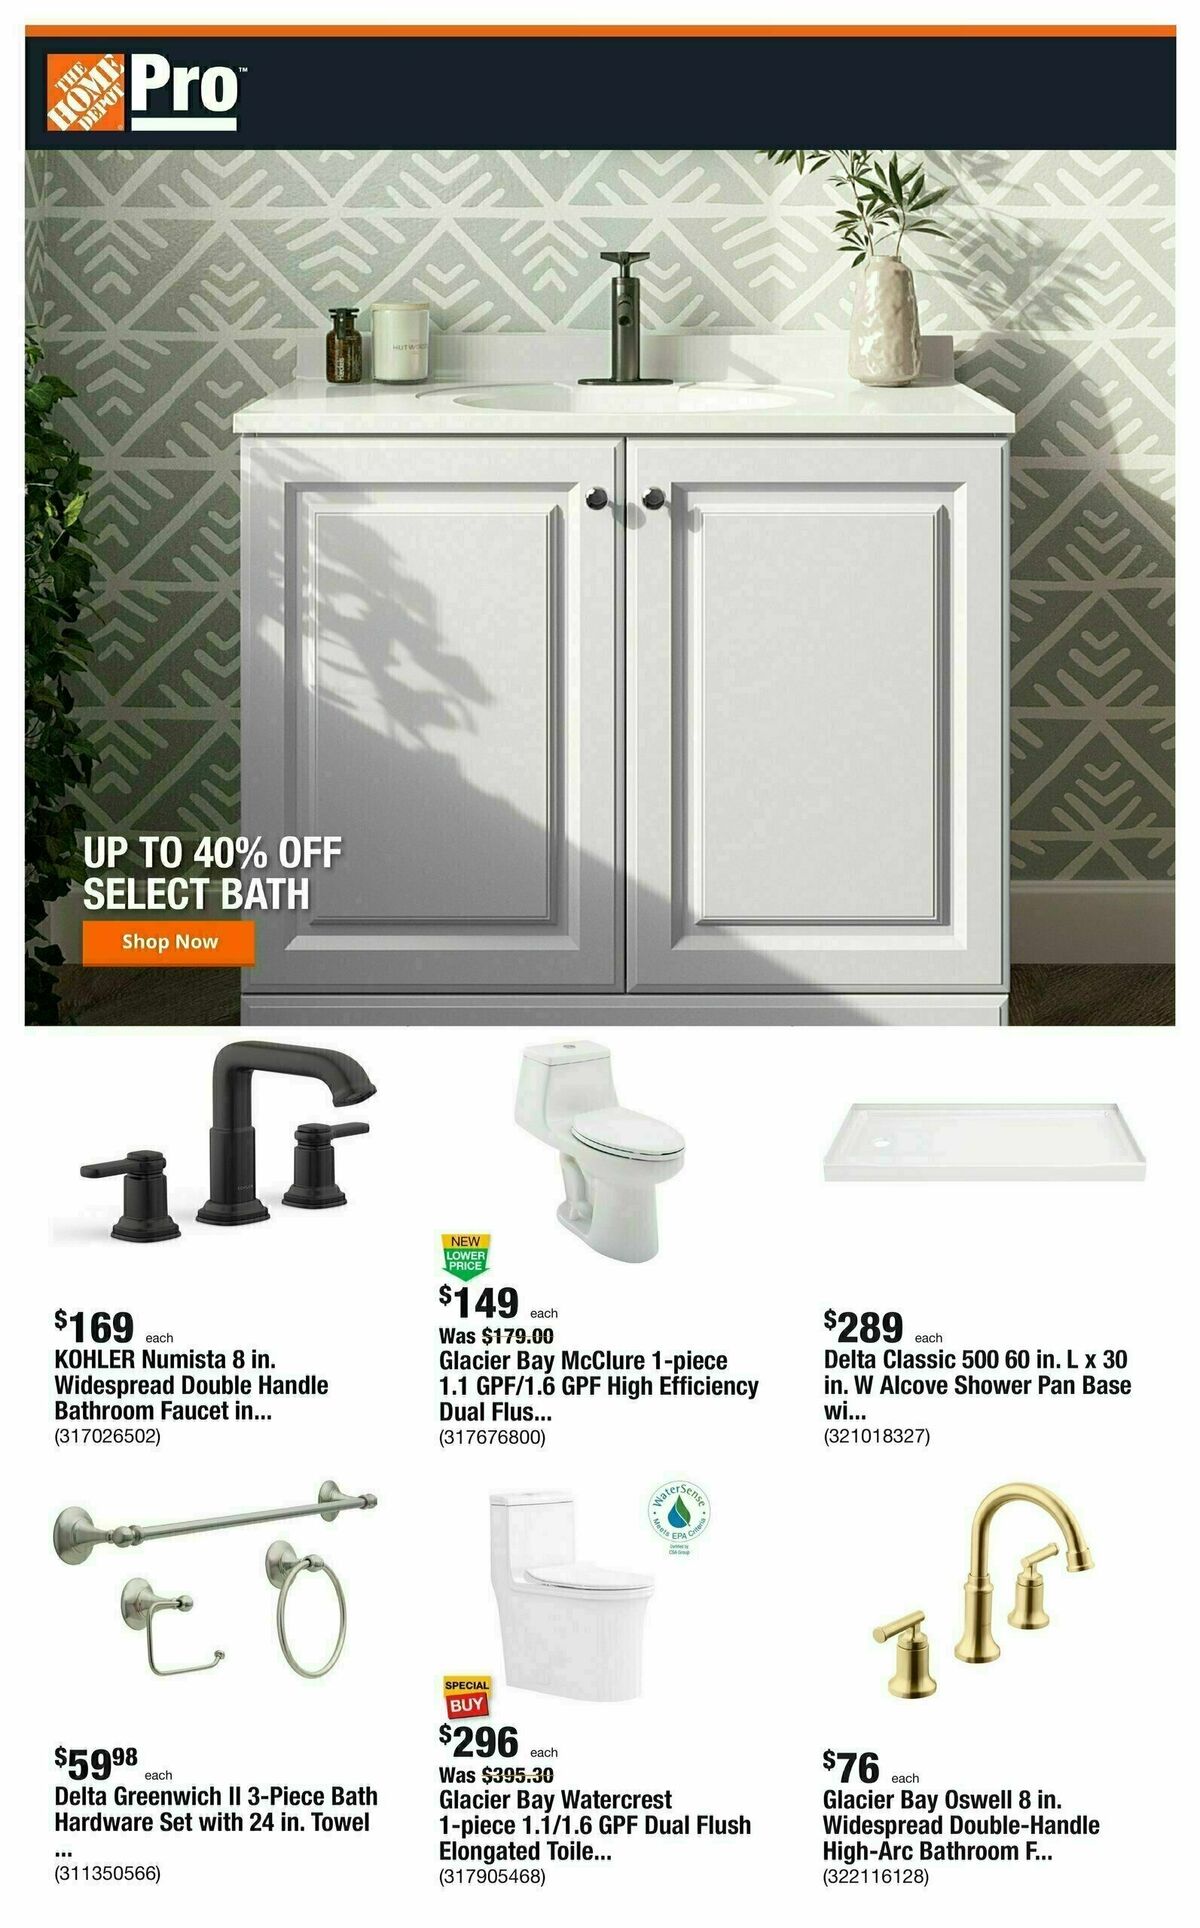 The Home Depot Pro Weekly Ad from January 22